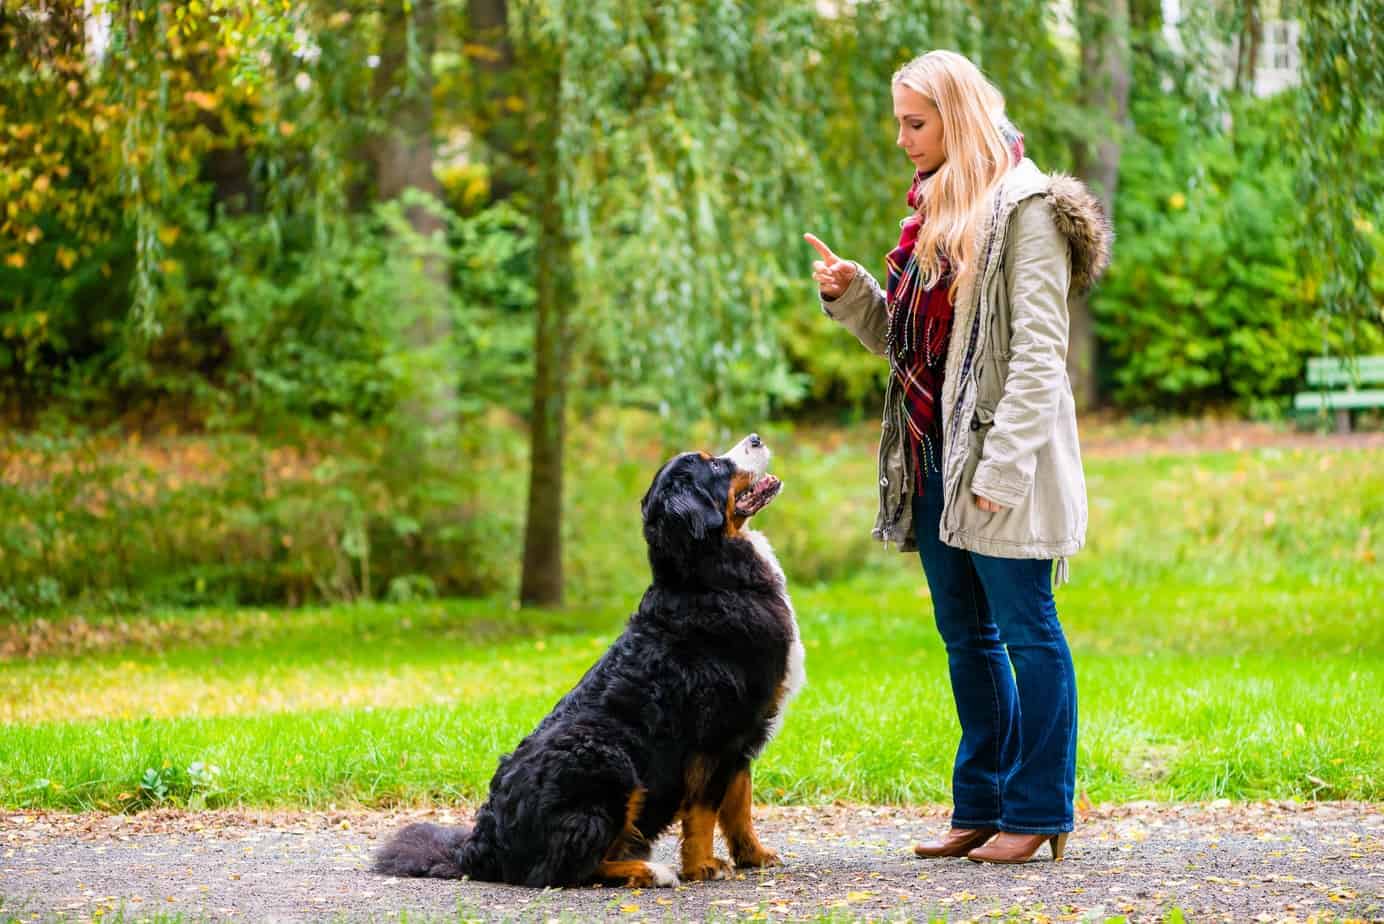 Prey drive helps determine how biddable or trainable your dog will be